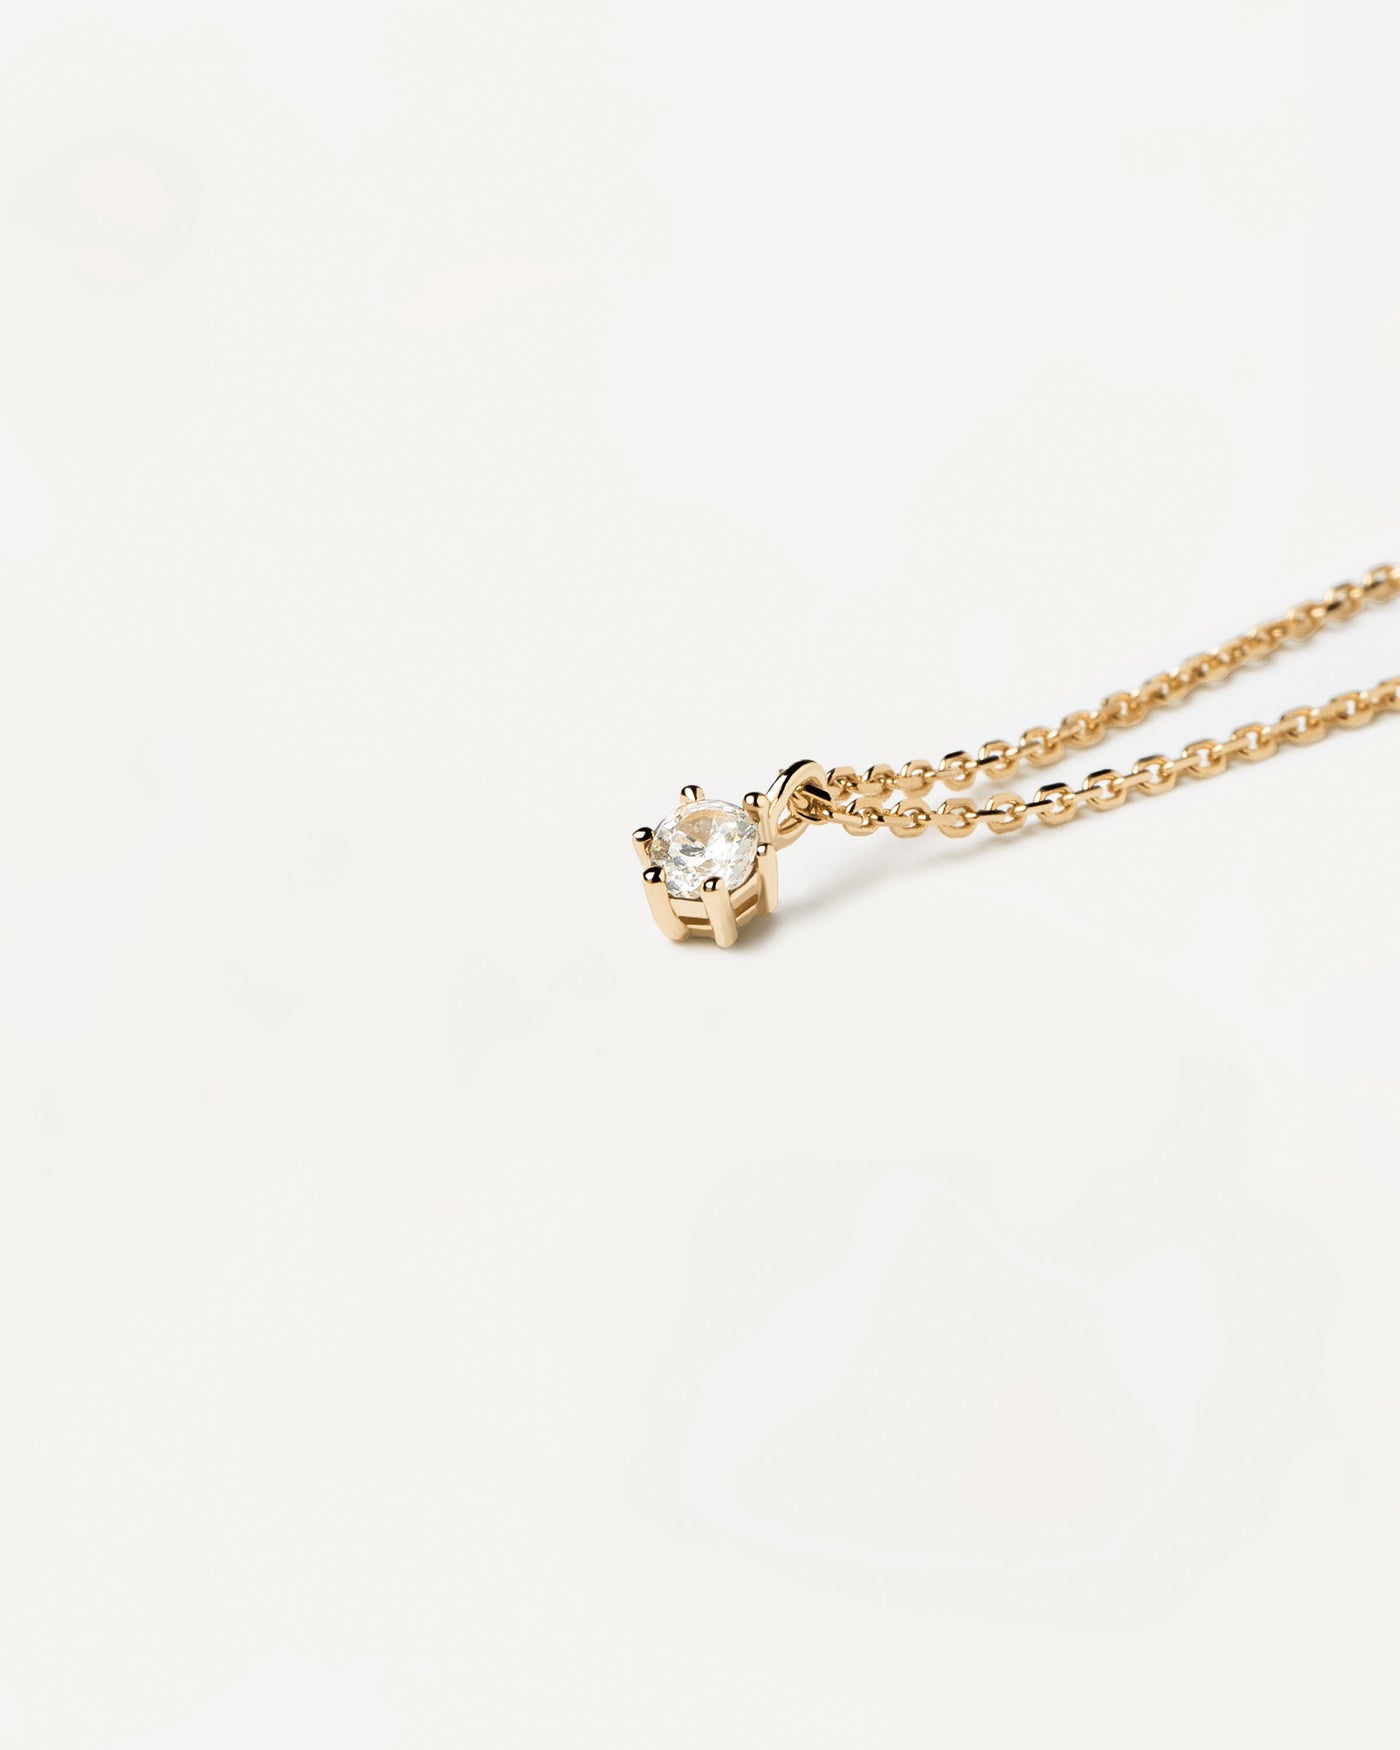 2023 Selection | White Solitary Necklace. Single link chain necklace in 18k gold plated silver with a white zirconia on prongs. Get the latest arrival from PDPAOLA. Place your order safely and get this Best Seller. Free Shipping.